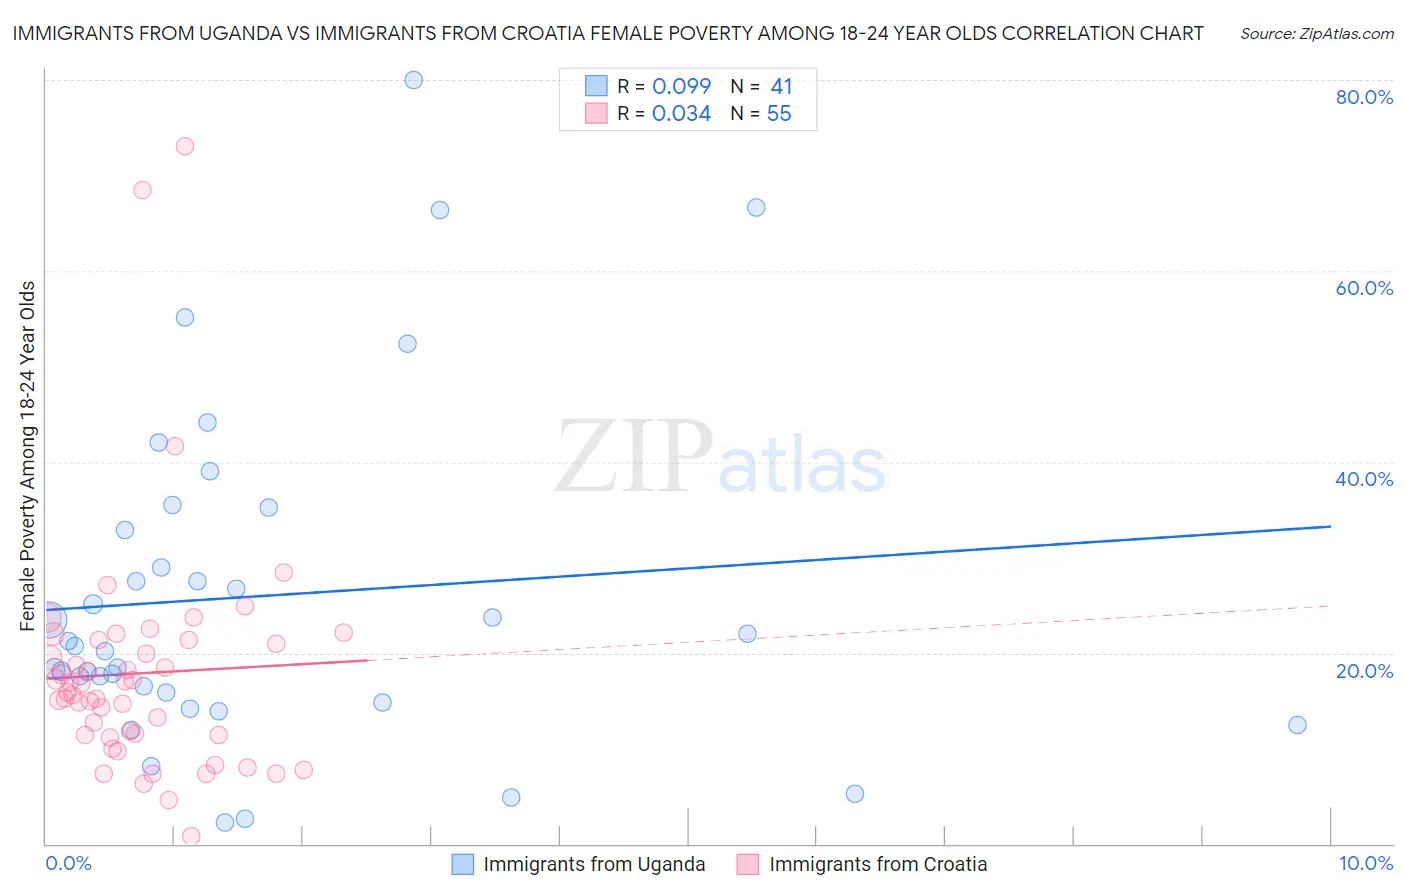 Immigrants from Uganda vs Immigrants from Croatia Female Poverty Among 18-24 Year Olds